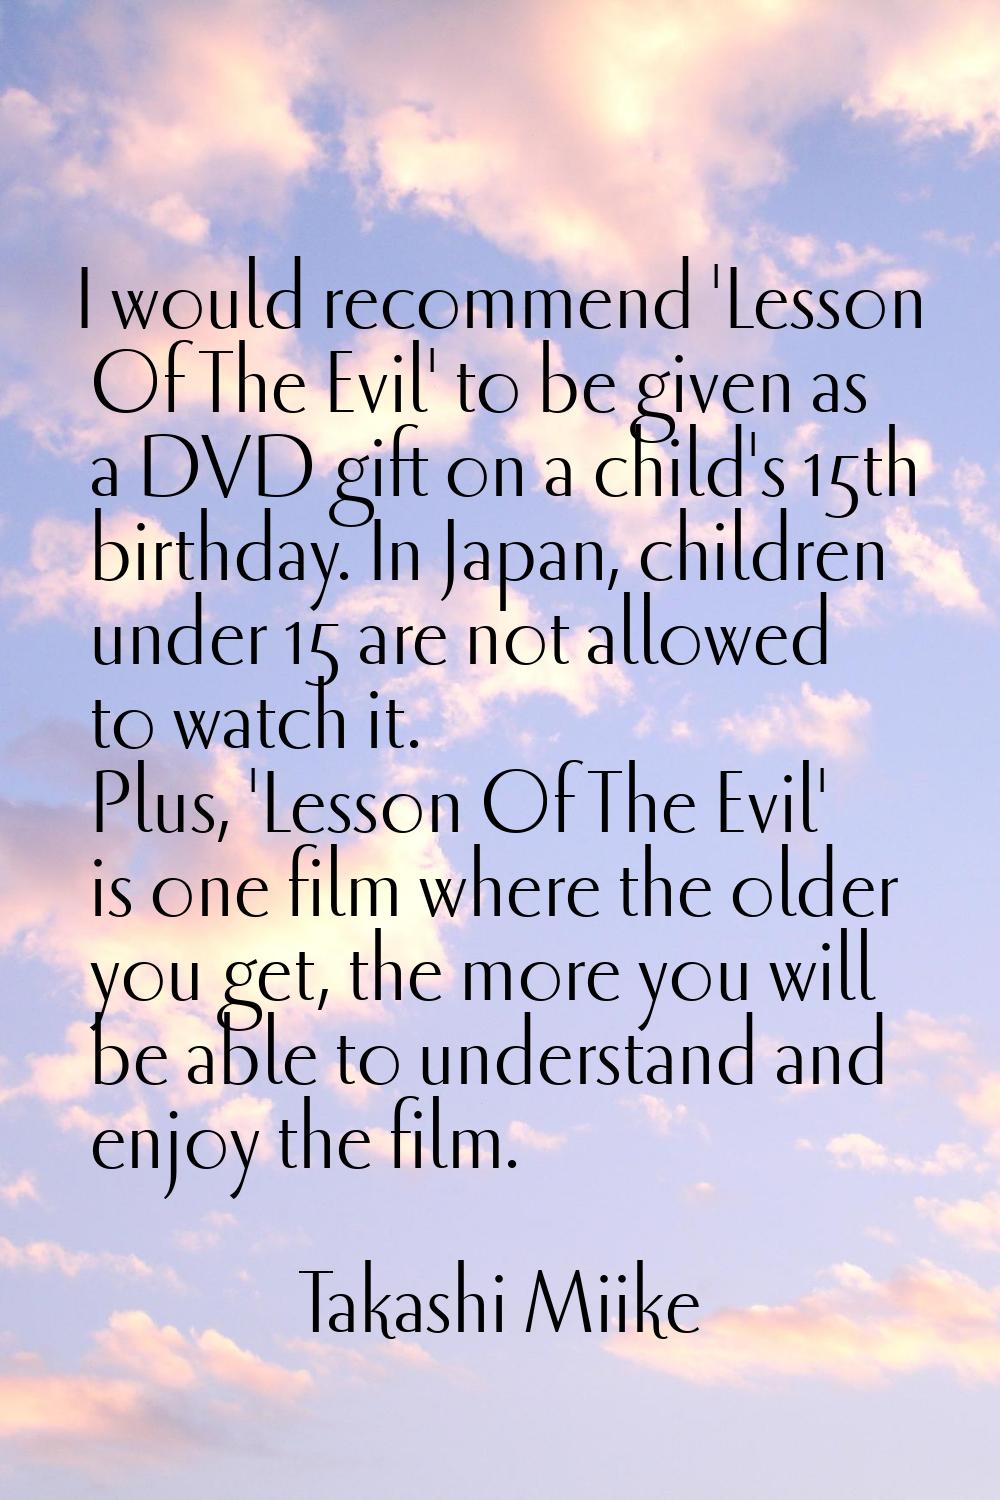 I would recommend 'Lesson Of The Evil' to be given as a DVD gift on a child's 15th birthday. In Jap